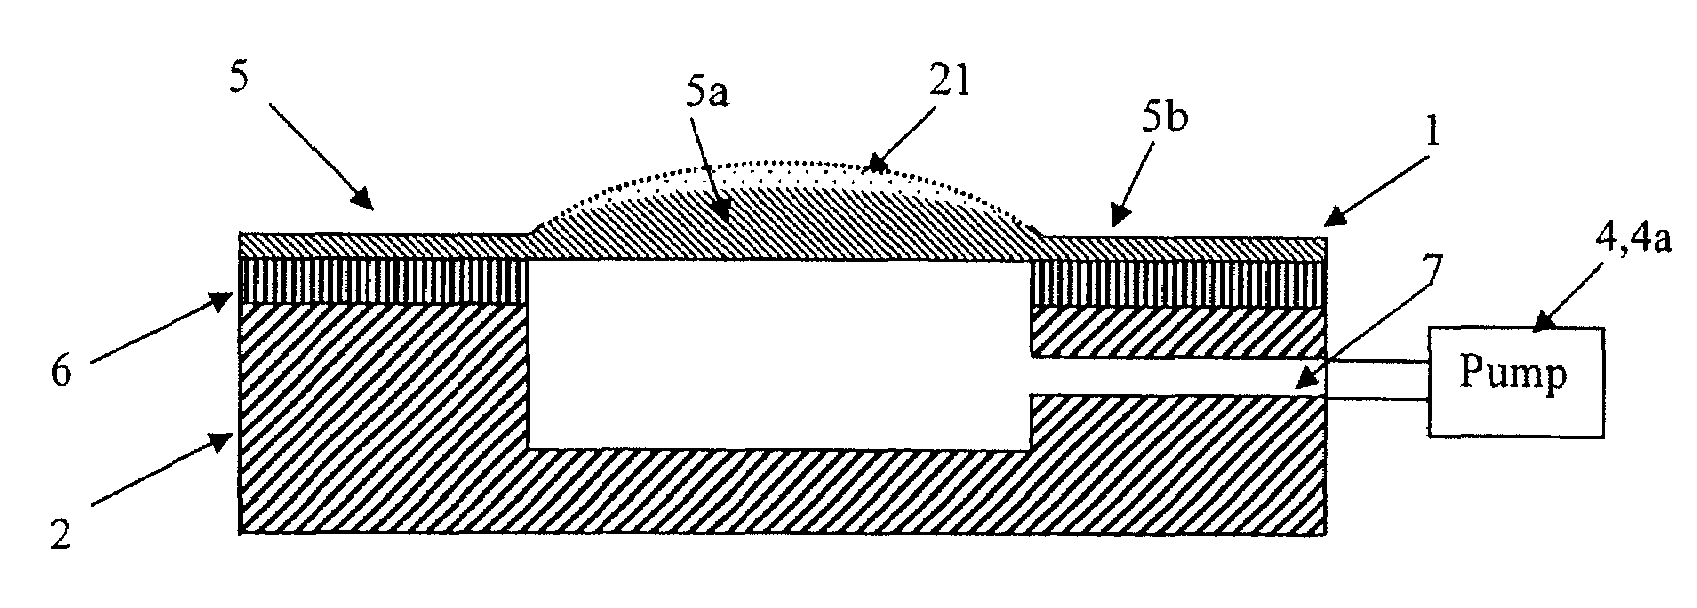 Wide-angle variable focal length lens system